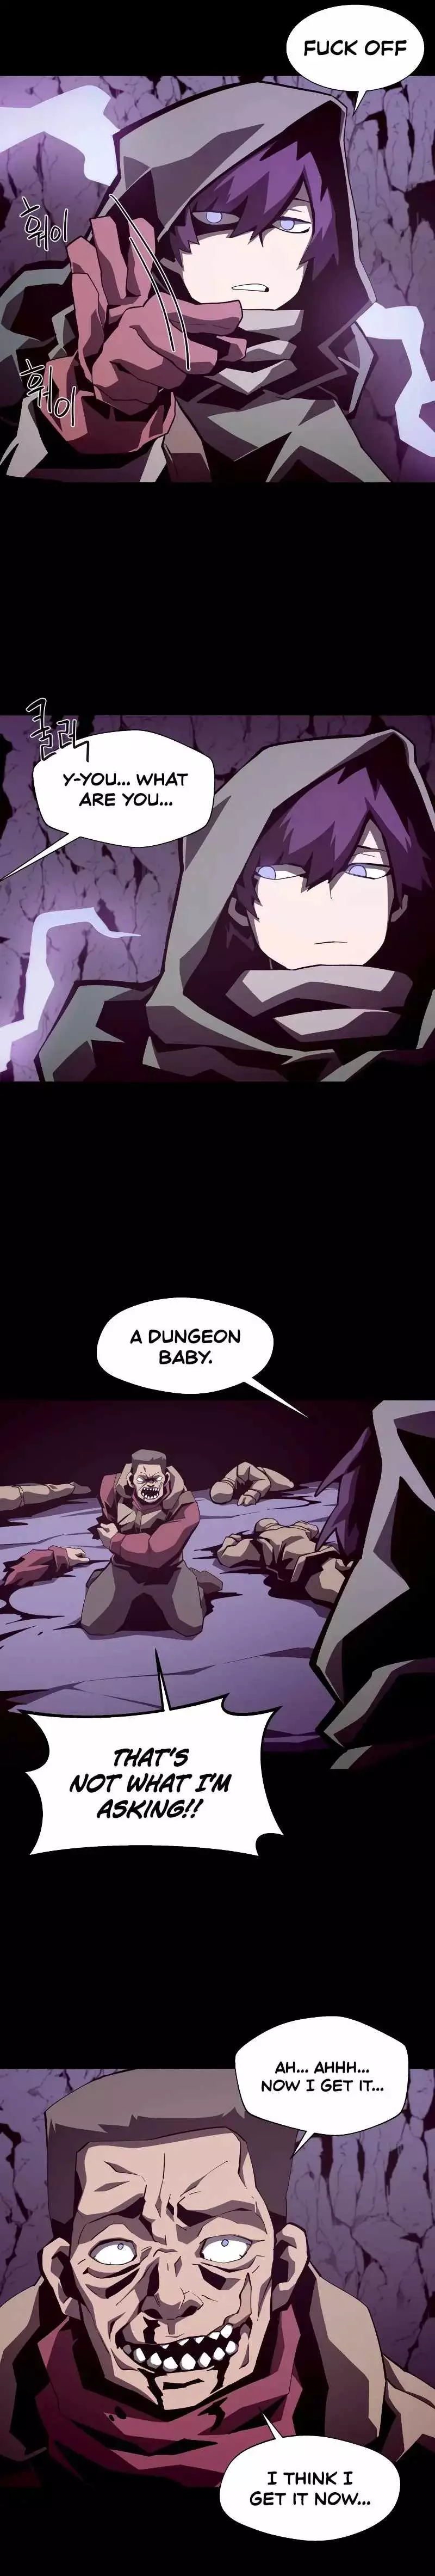 Dungeon Odyssey - 37 page 16-19312c6e